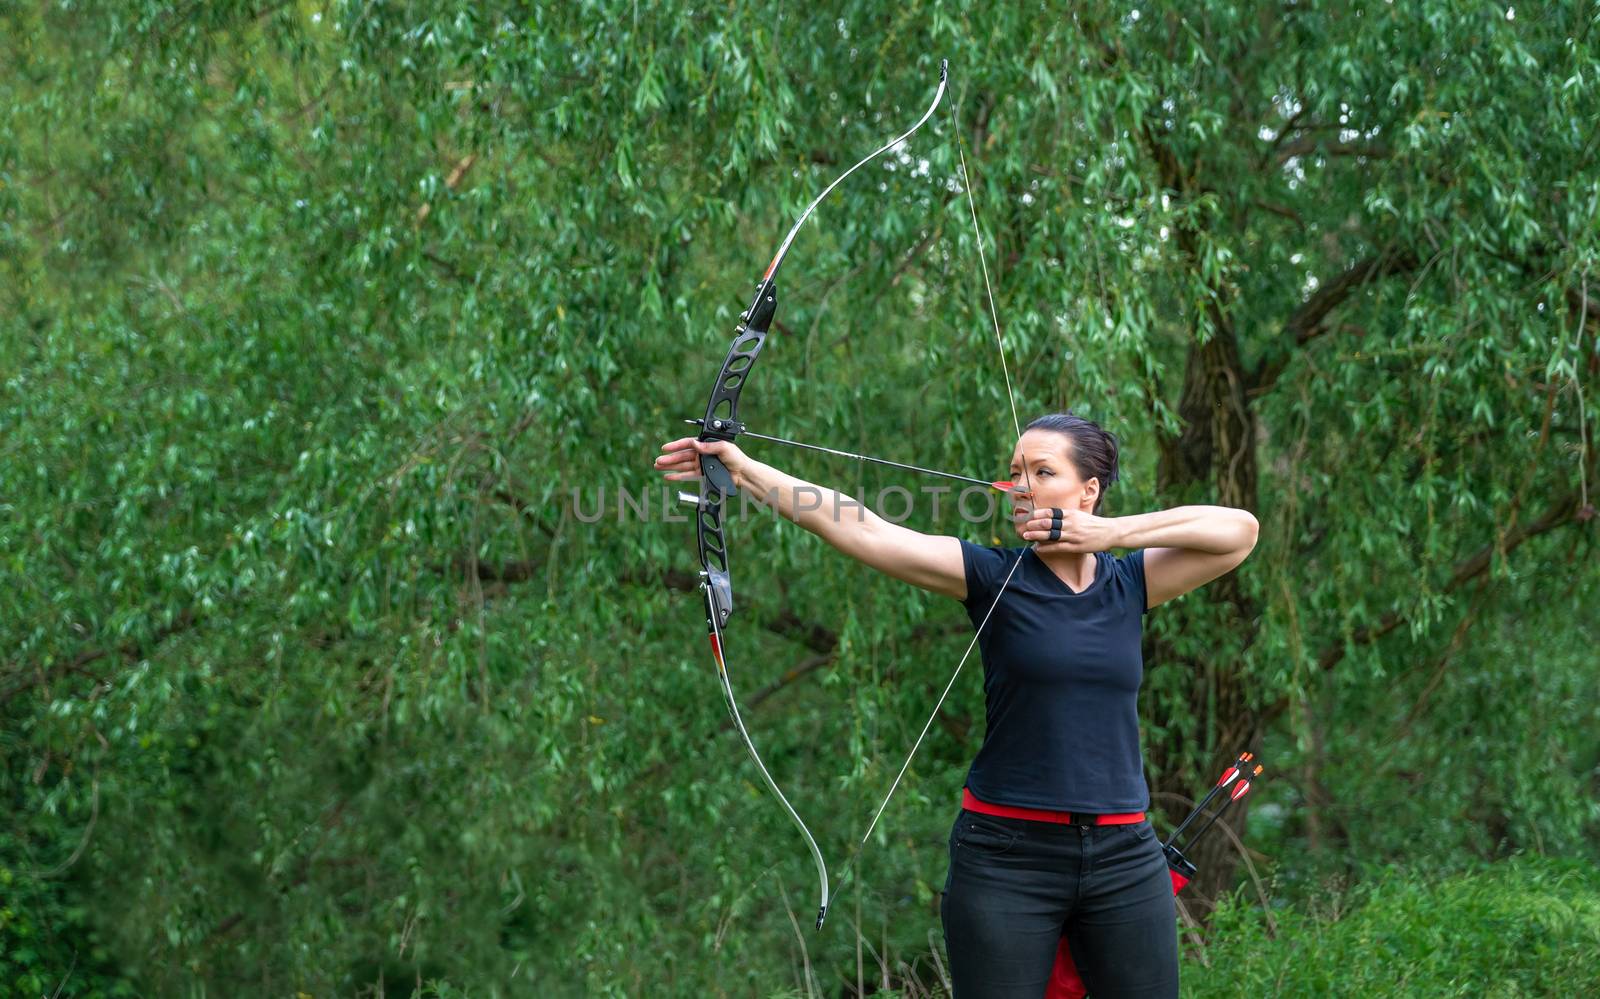 arrow shooting from a bow in nature, sport archery.